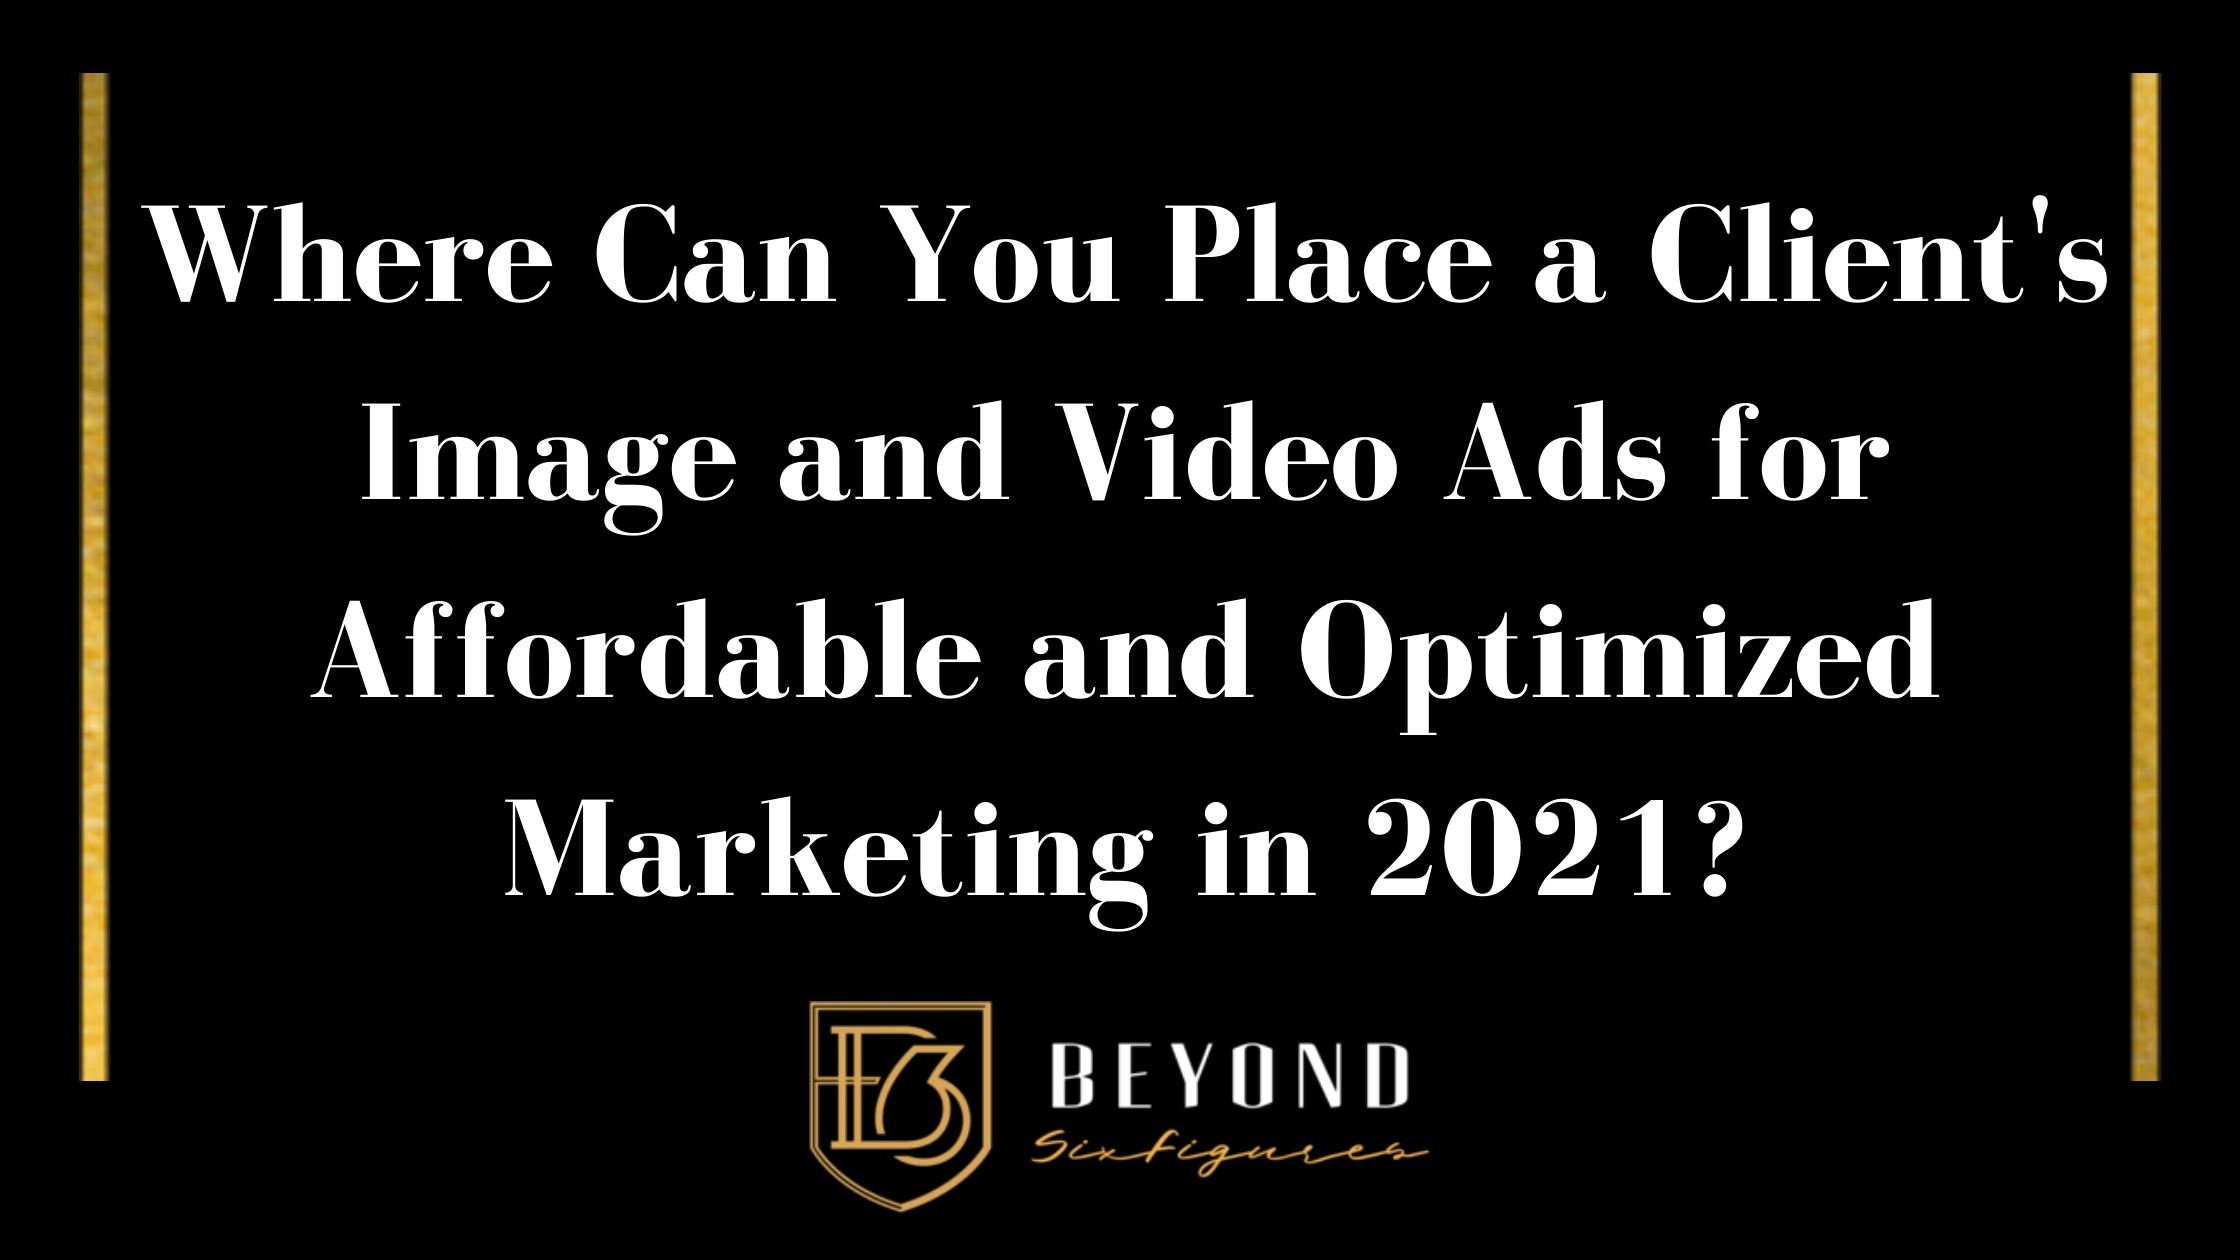 Blog banner that reads: Where Can You Place a Client's Image and Video Ads for Affordable and Optimized Marketing in 2021?